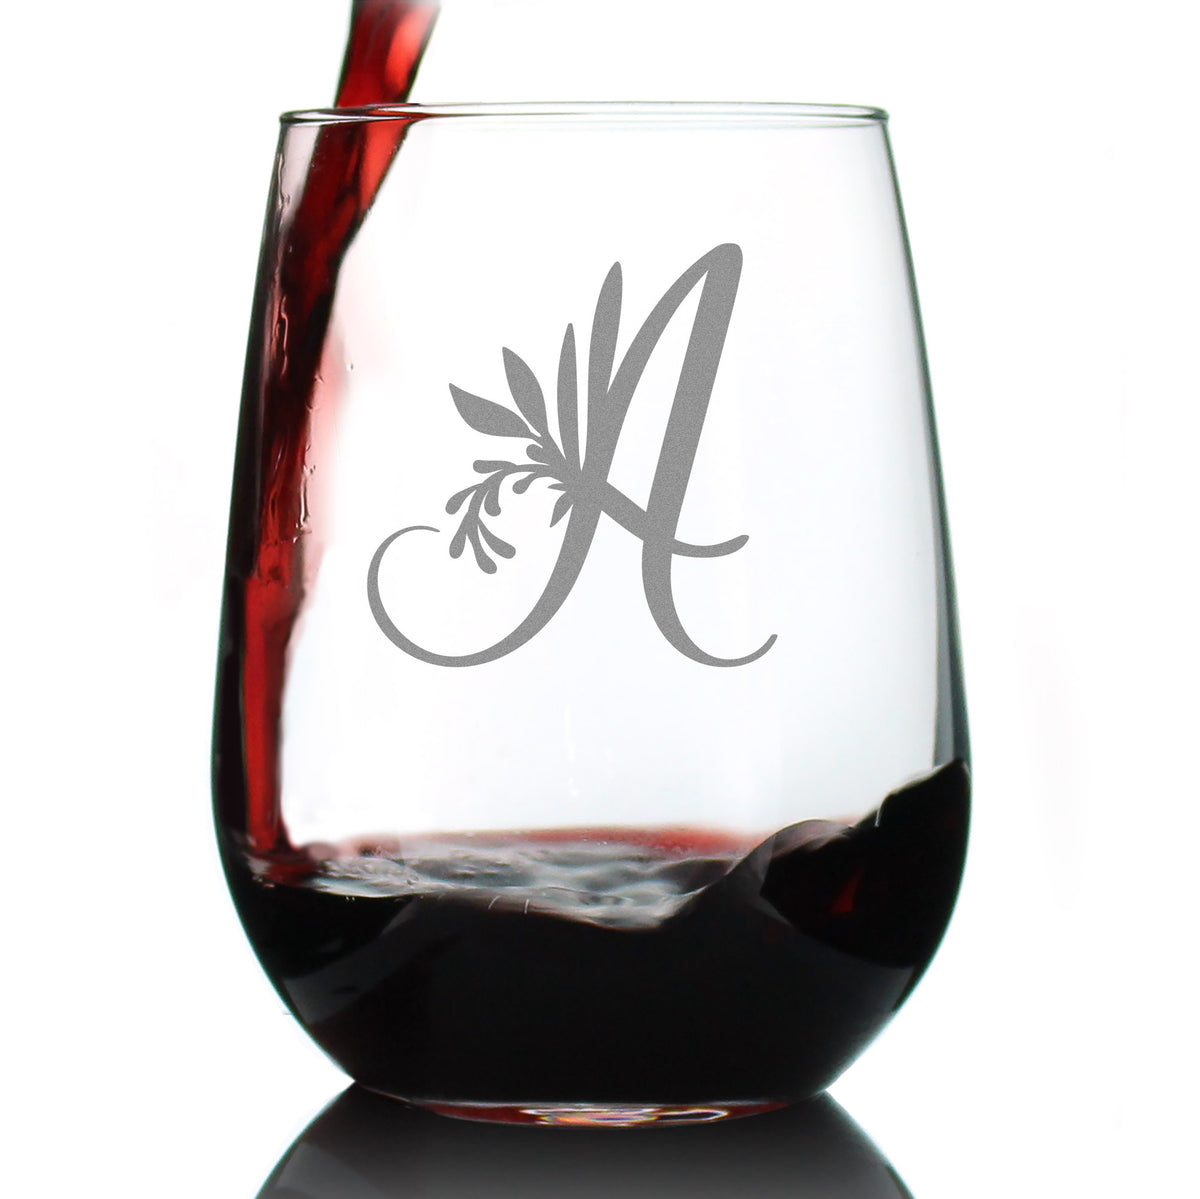 Monogram Floral Letter A - Stemless Wine Glass - Personalized Gifts for Women and Men - Large Engraved Glasses